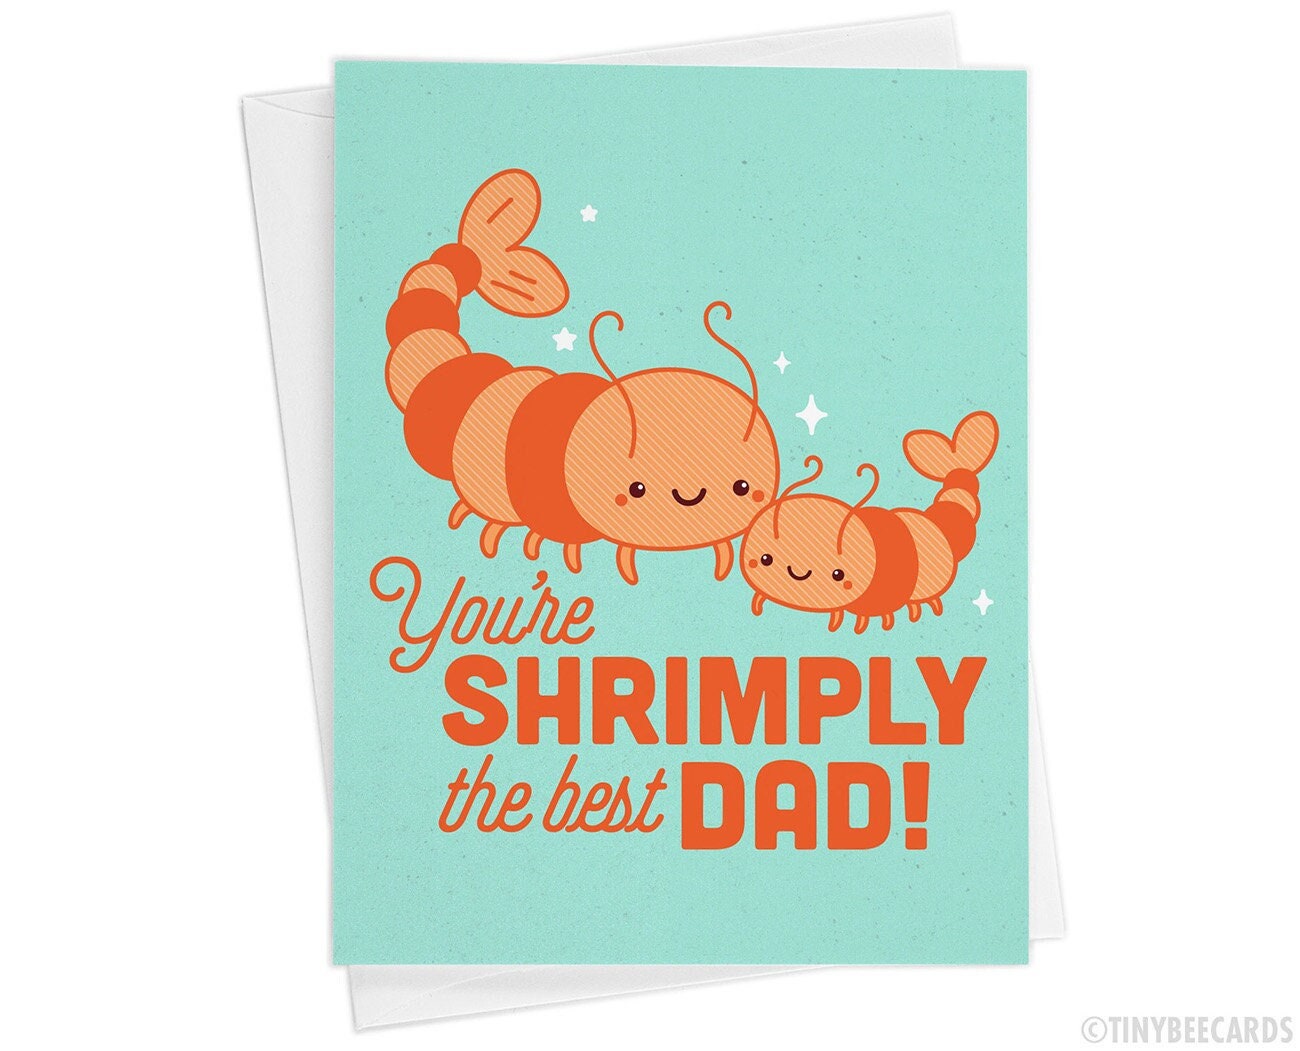 Funny Shrimp Fathers Day Card "You're Shrimply the Best Dad" - cute card for dad, shrimp lover, animal foodie card, kawaii card for him